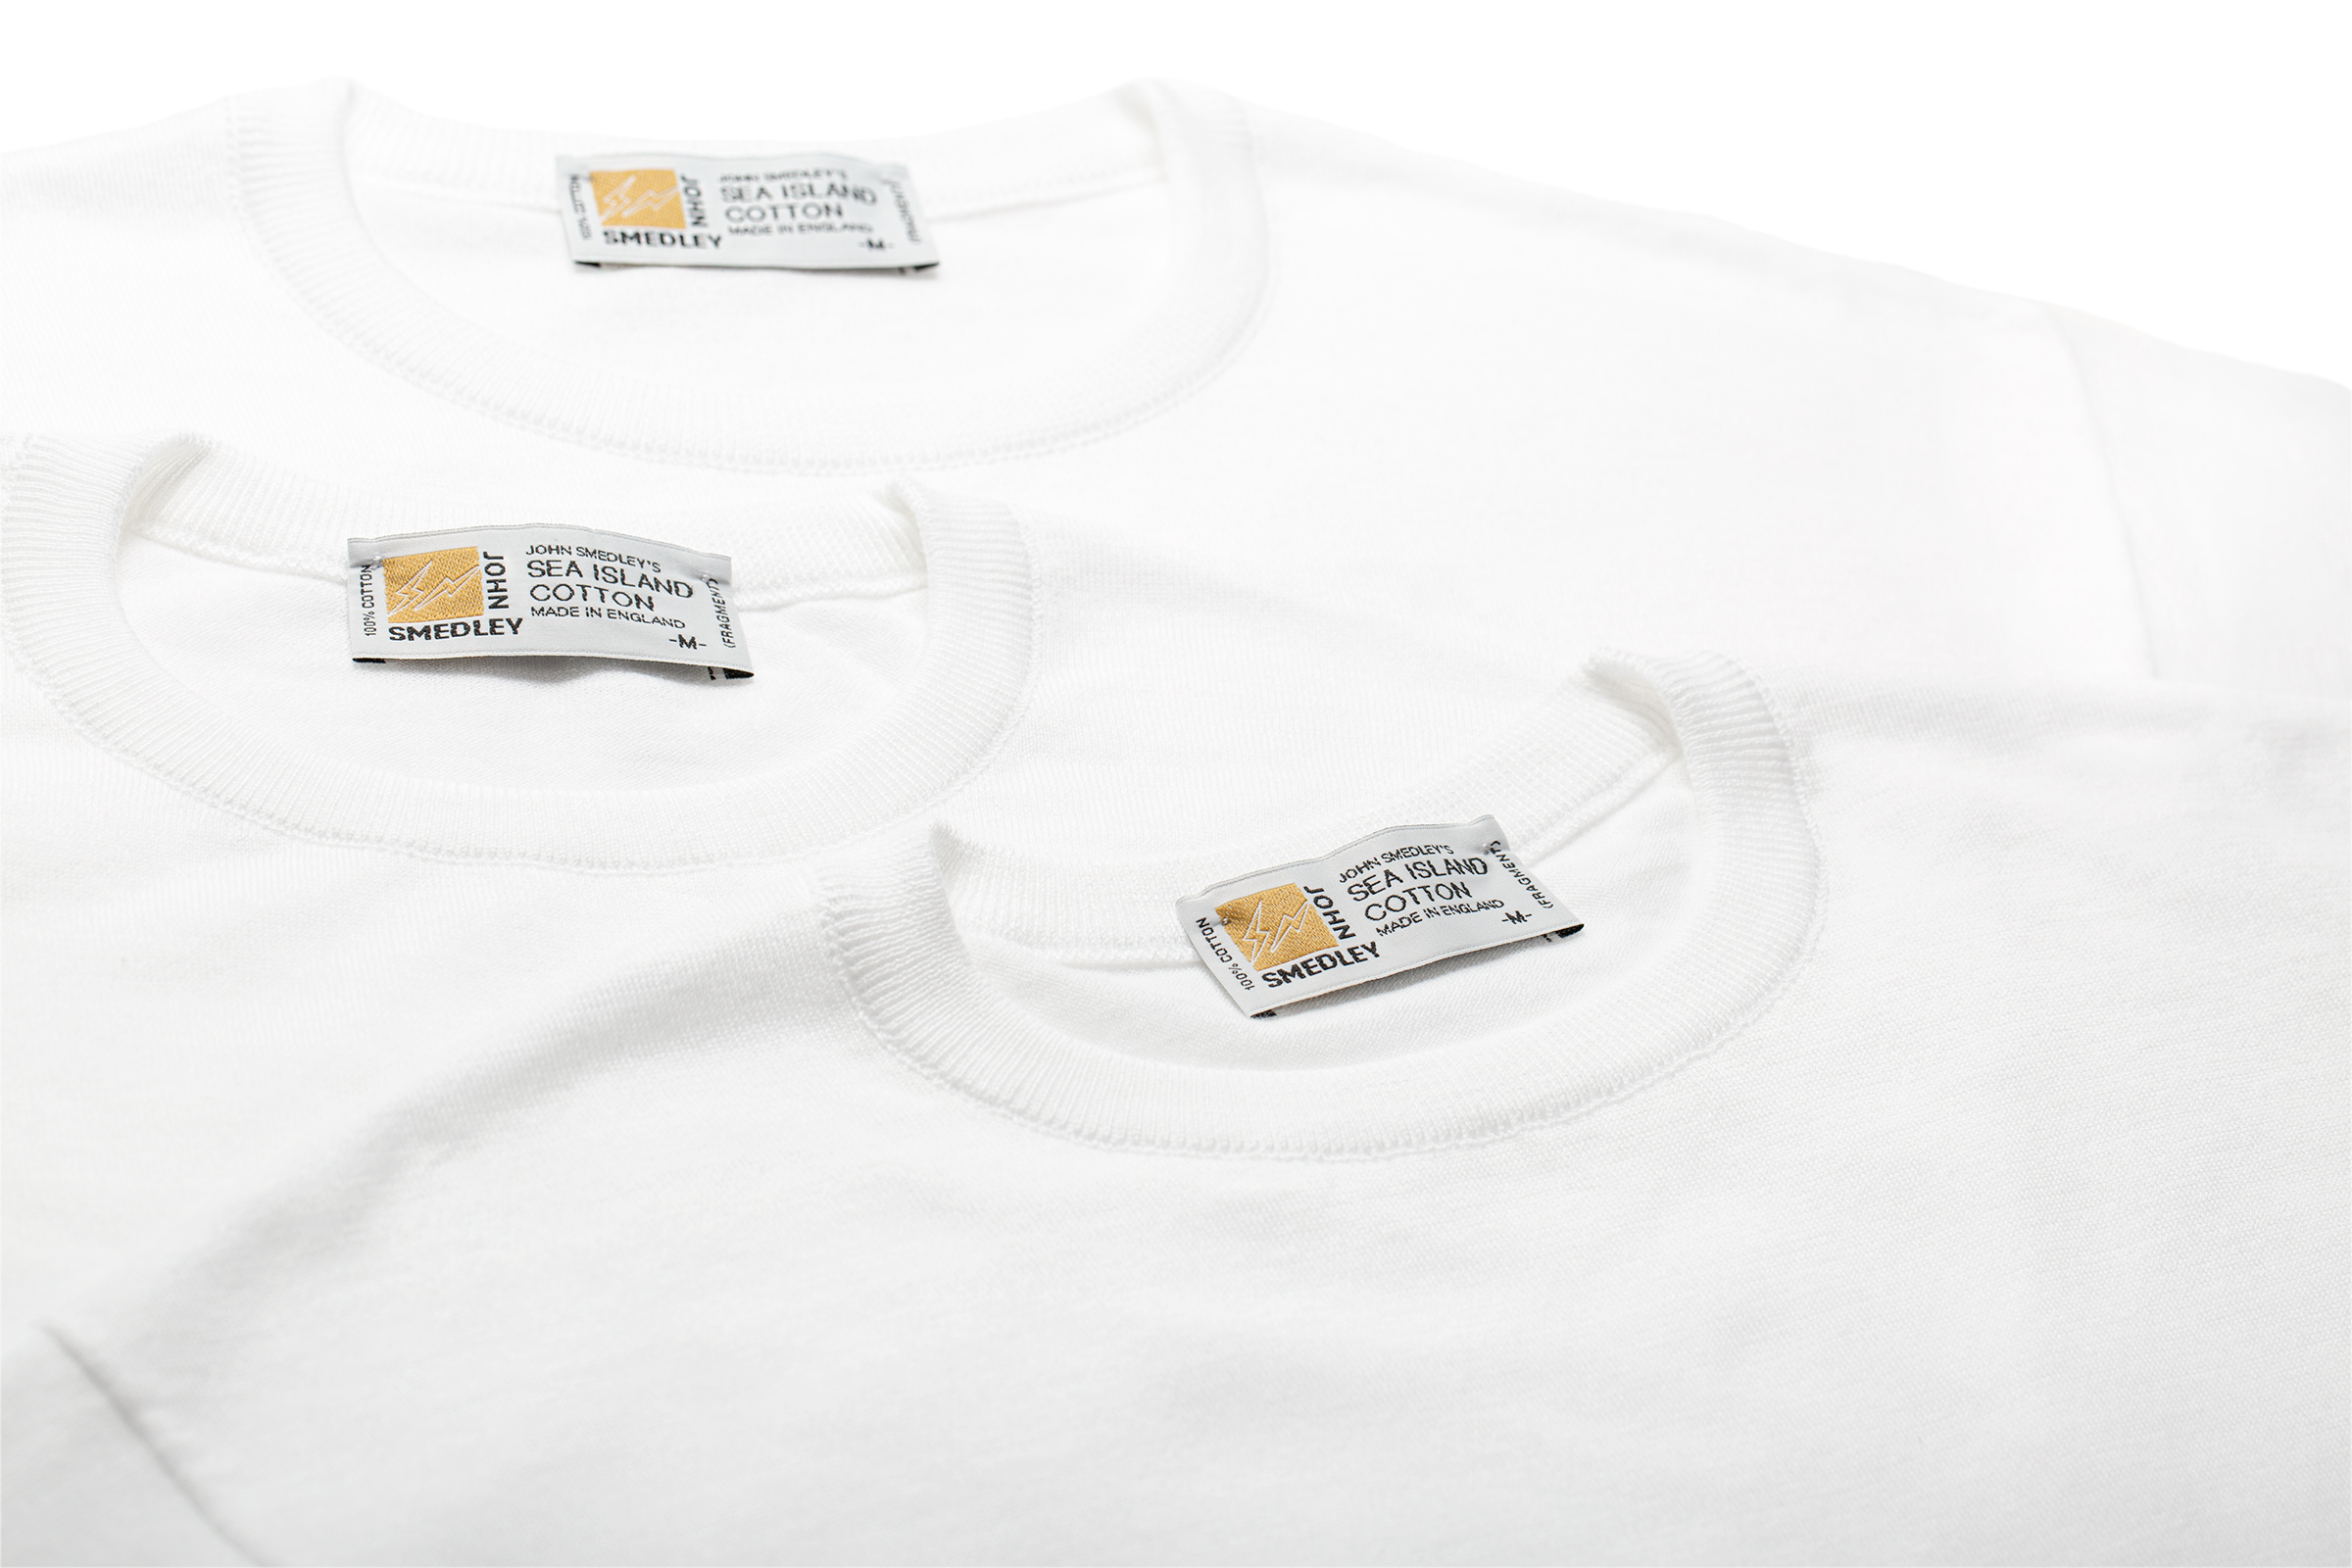 FRAGMENT DESIGN x JOHN SMEDLEY The second series is the world's 